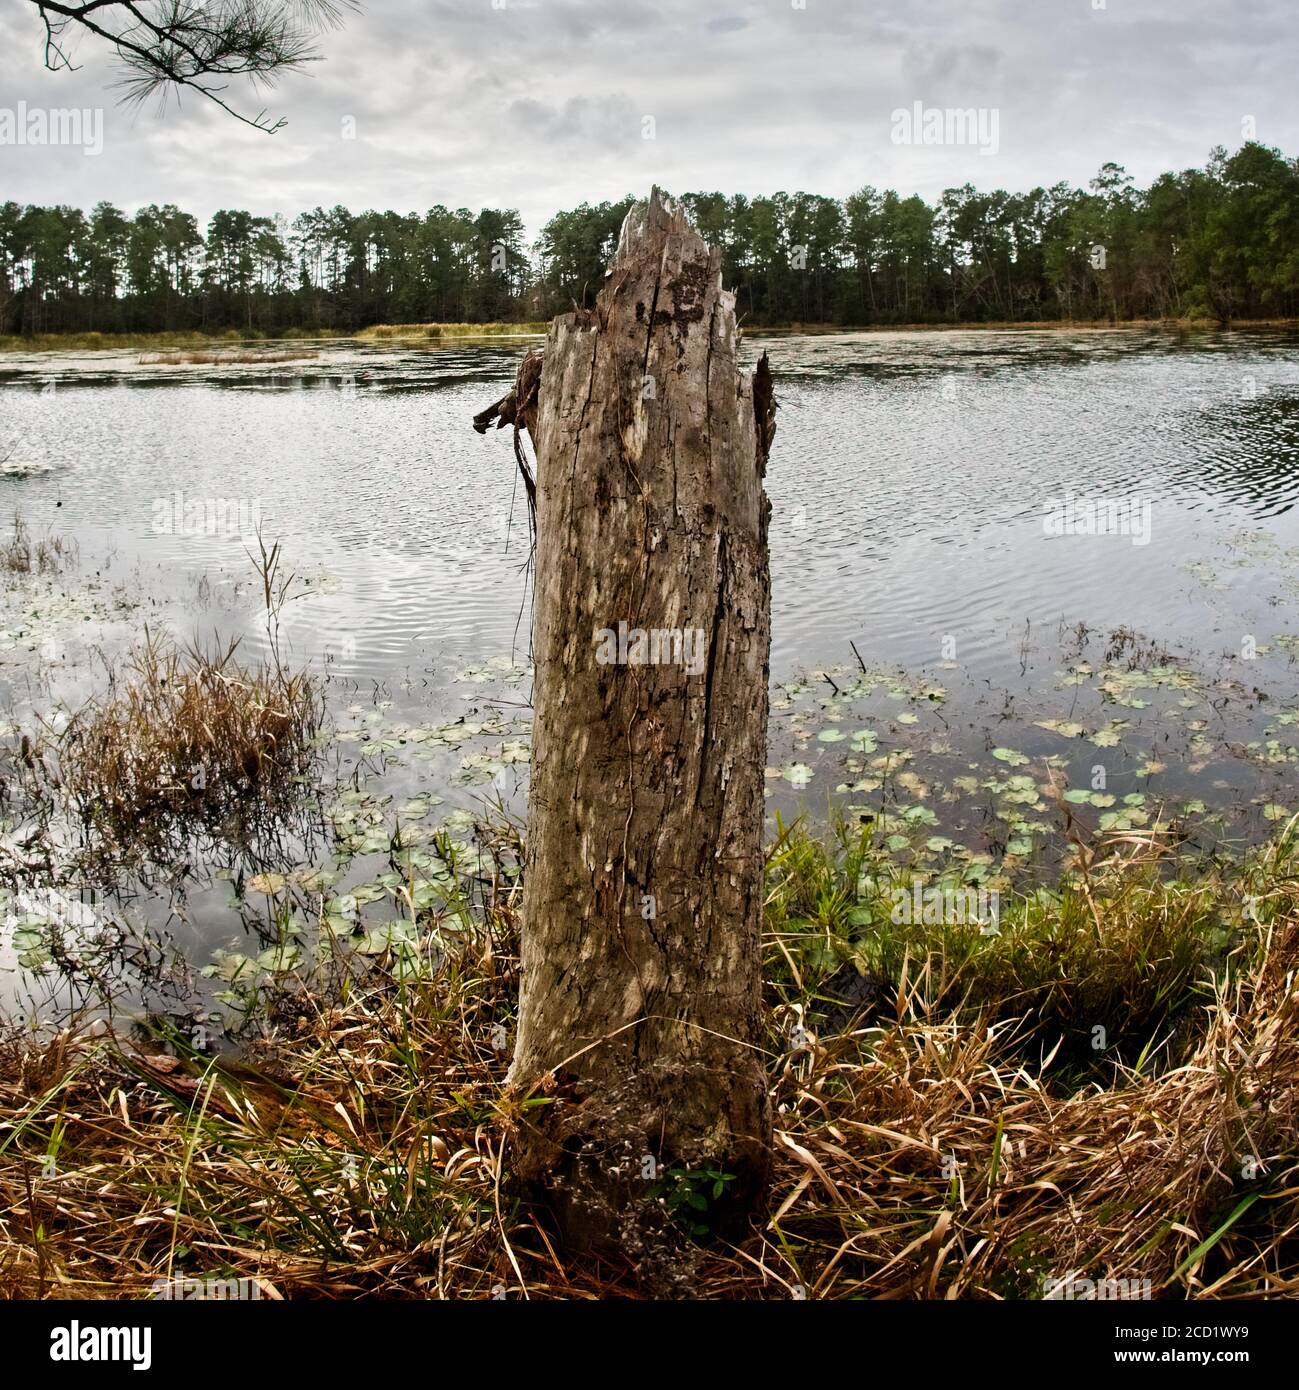 The Woodlands TX USA - 01-09-2020 - Dead Tree by See Stockfoto